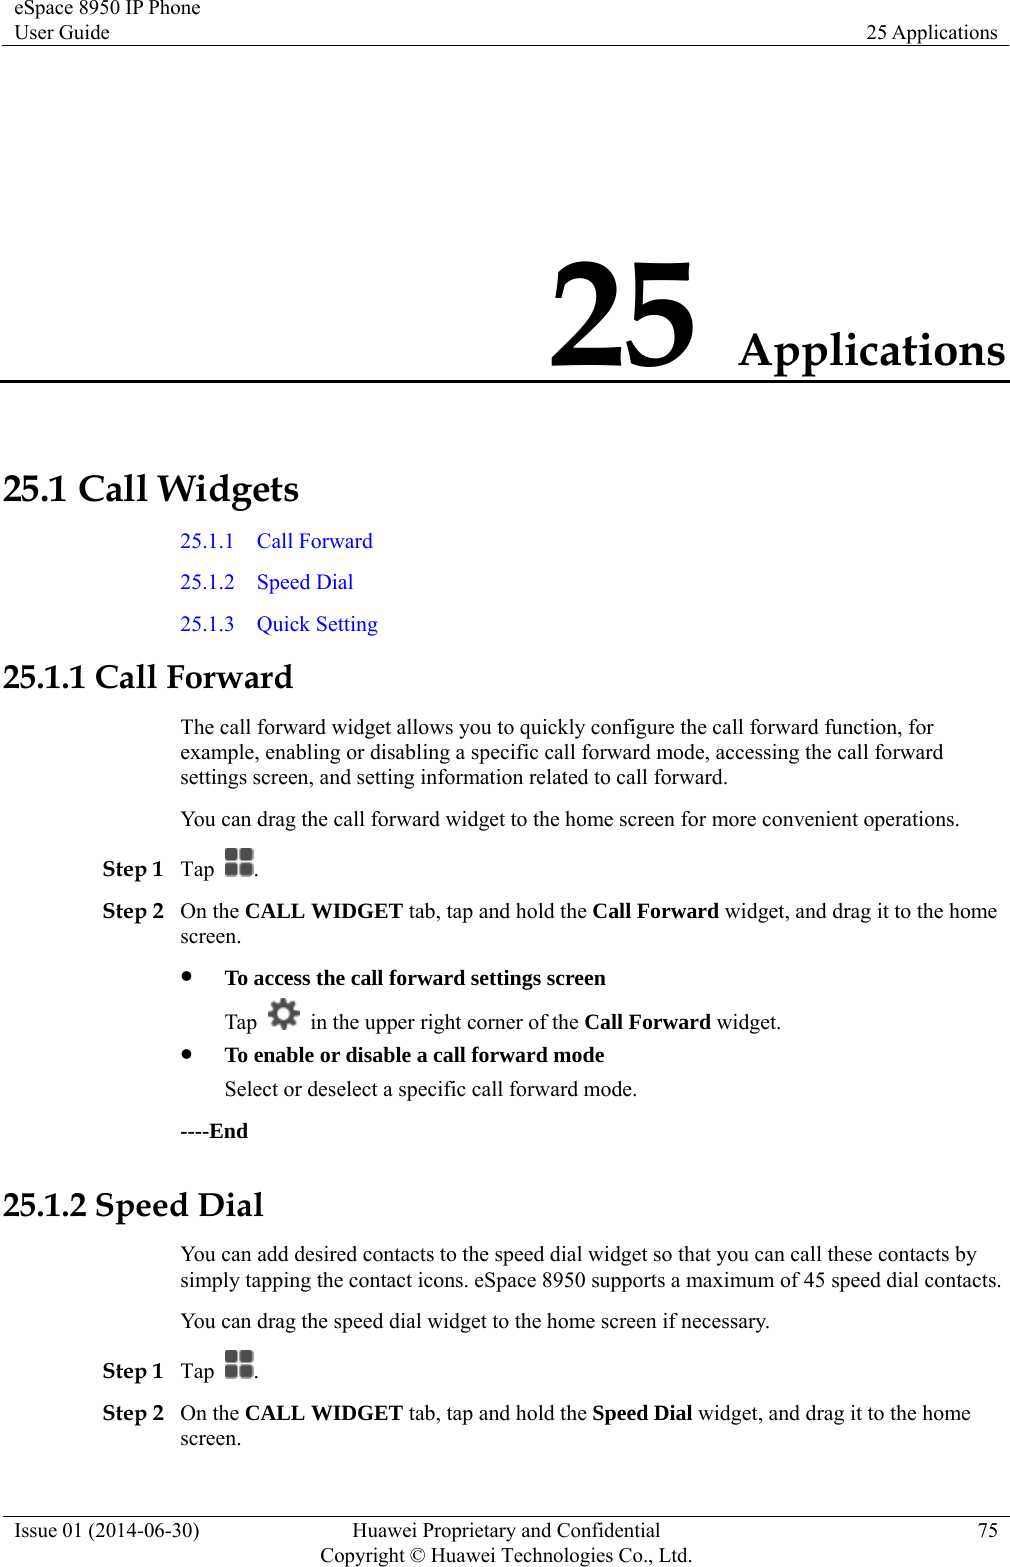 eSpace 8950 IP Phone User Guide  25 Applications Issue 01 (2014-06-30)  Huawei Proprietary and Confidential         Copyright © Huawei Technologies Co., Ltd.75 25 Applications 25.1 Call Widgets 25.1.1  Call Forward 25.1.2  Speed Dial 25.1.3  Quick Setting 25.1.1 Call Forward The call forward widget allows you to quickly configure the call forward function, for example, enabling or disabling a specific call forward mode, accessing the call forward settings screen, and setting information related to call forward. You can drag the call forward widget to the home screen for more convenient operations. Step 1 Tap  . Step 2 On the CALL WIDGET tab, tap and hold the Call Forward widget, and drag it to the home screen.  To access the call forward settings screen Tap    in the upper right corner of the Call Forward widget.  To enable or disable a call forward mode Select or deselect a specific call forward mode. ----End 25.1.2 Speed Dial You can add desired contacts to the speed dial widget so that you can call these contacts by simply tapping the contact icons. eSpace 8950 supports a maximum of 45 speed dial contacts. You can drag the speed dial widget to the home screen if necessary. Step 1 Tap  . Step 2 On the CALL WIDGET tab, tap and hold the Speed Dial widget, and drag it to the home screen. 